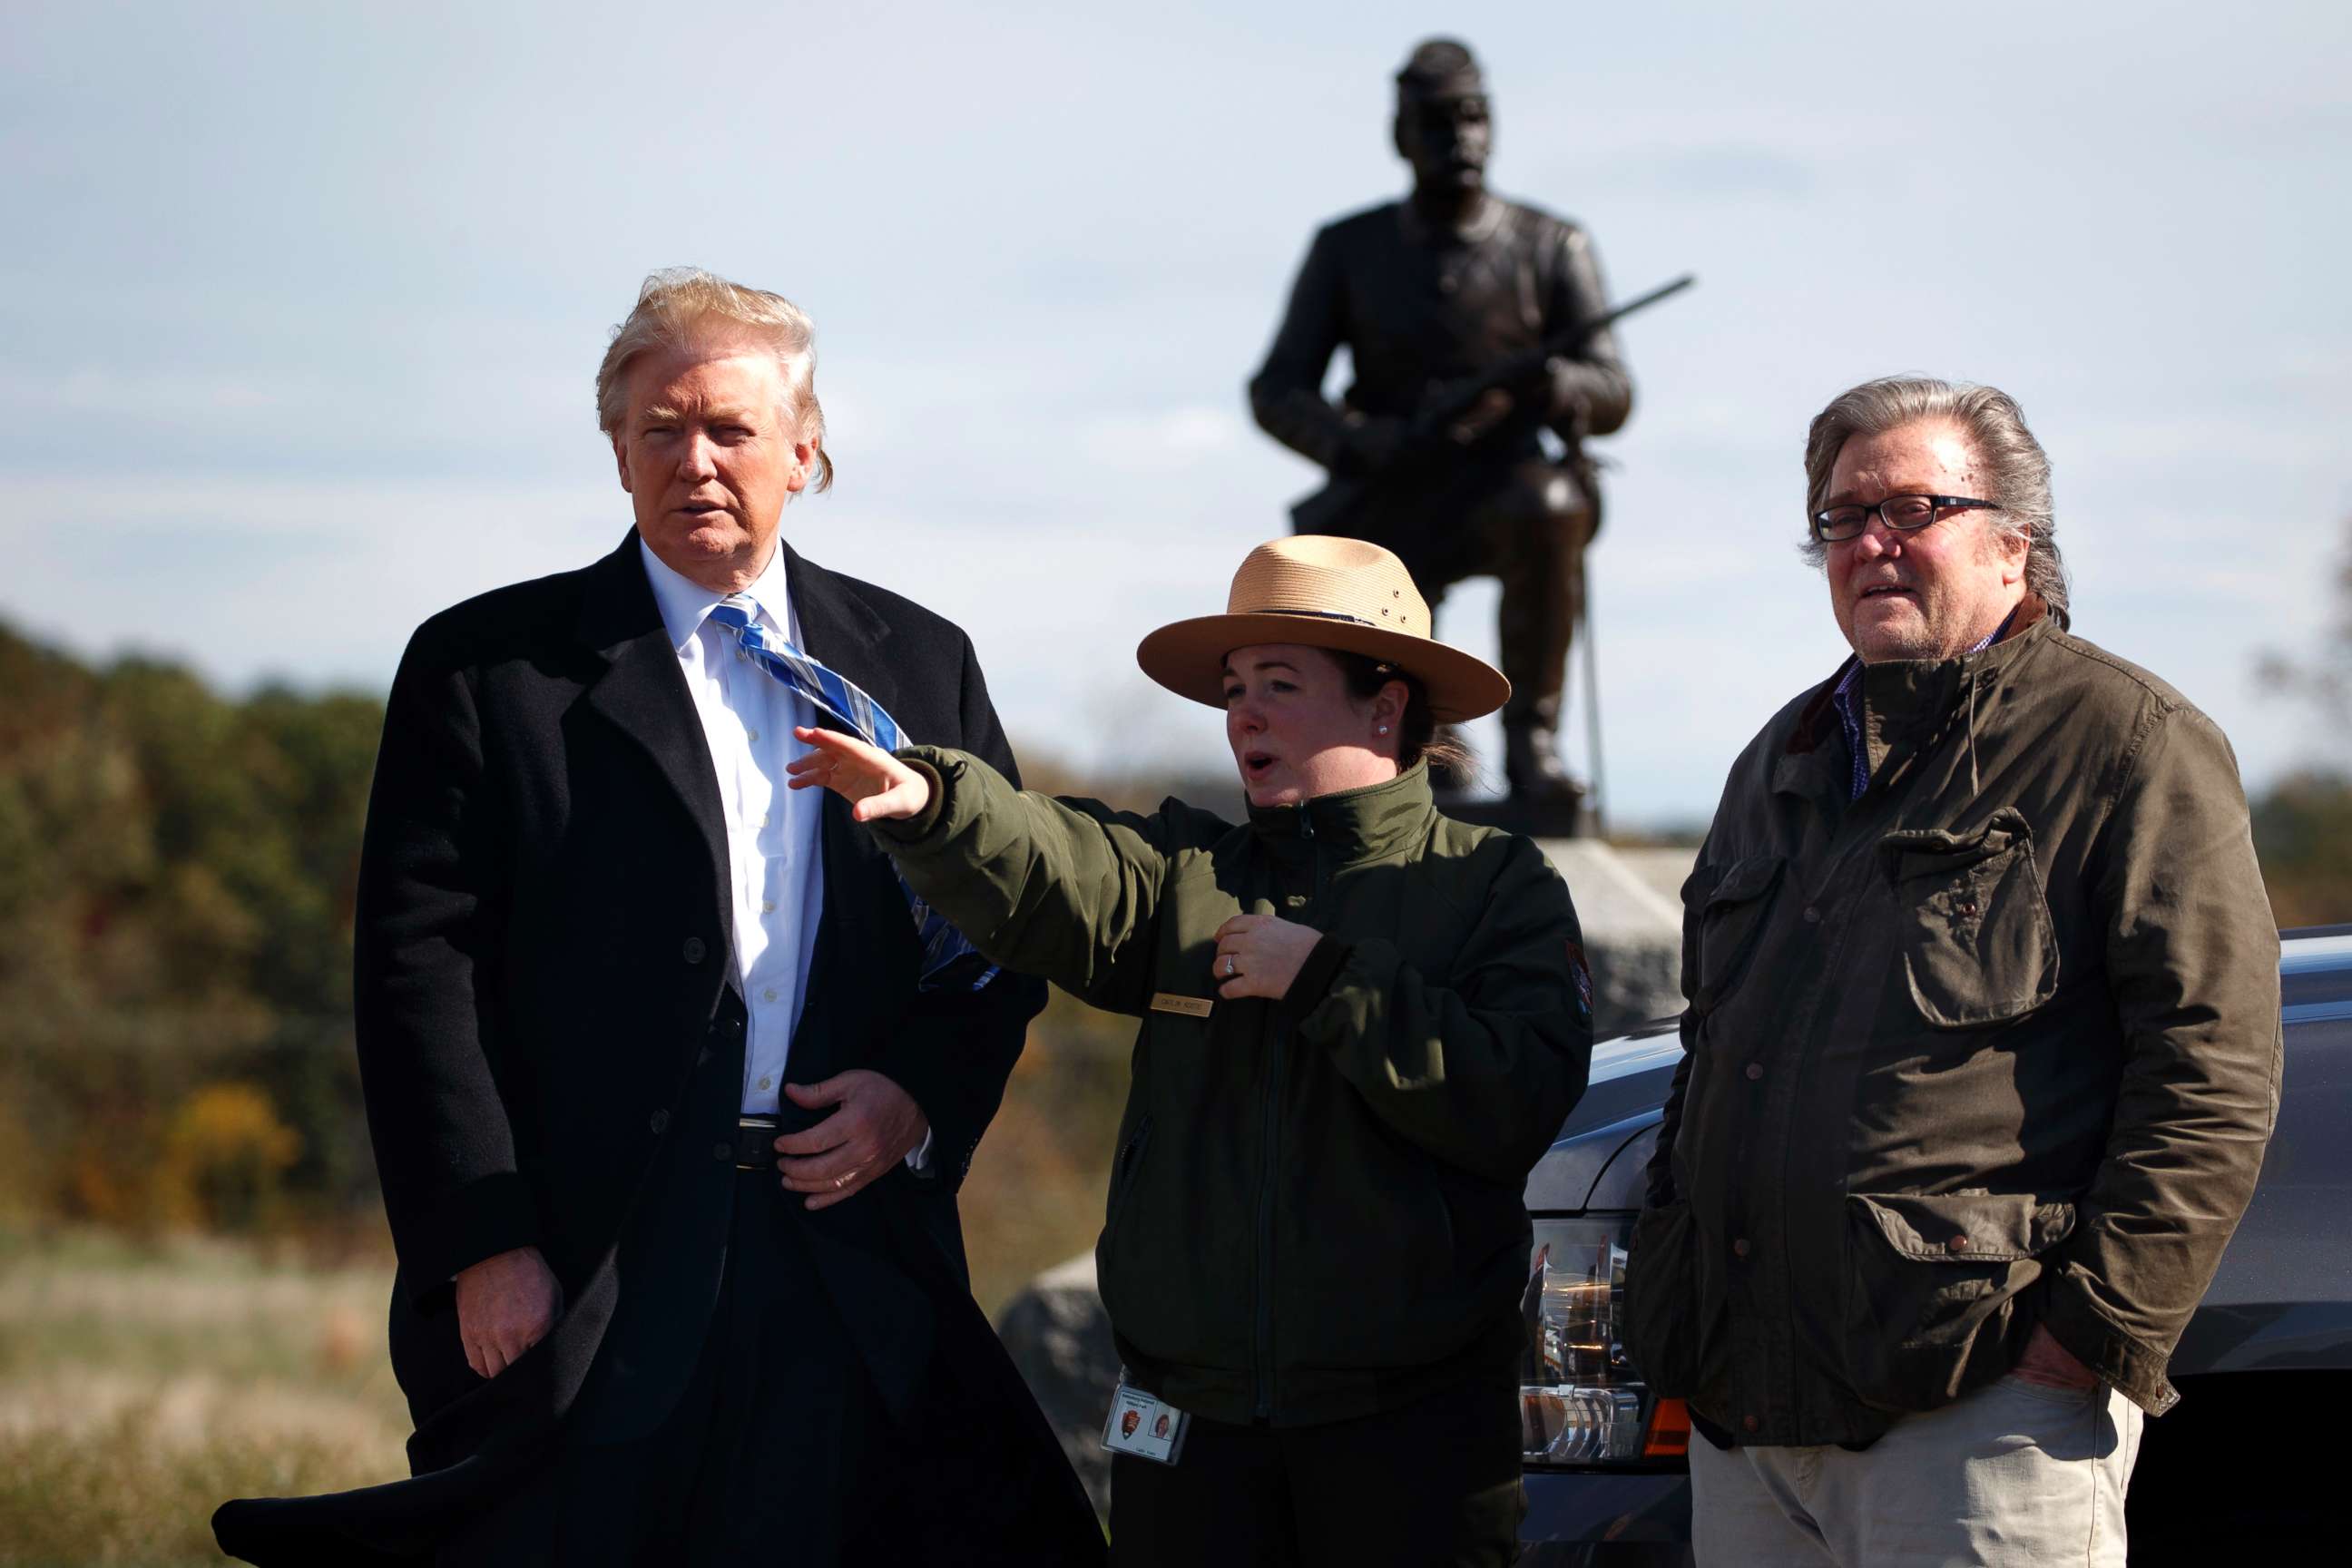 PHOTO: Park ranger Caitlin Kostic gives a tour near the high-water mark of the Confederacy at Gettysburg National Military Park to Republican presidential candidate Donald Trump, left, and campaign CEO Steve Bannon, Oct. 22, 2016, in Gettysburg, Pa.